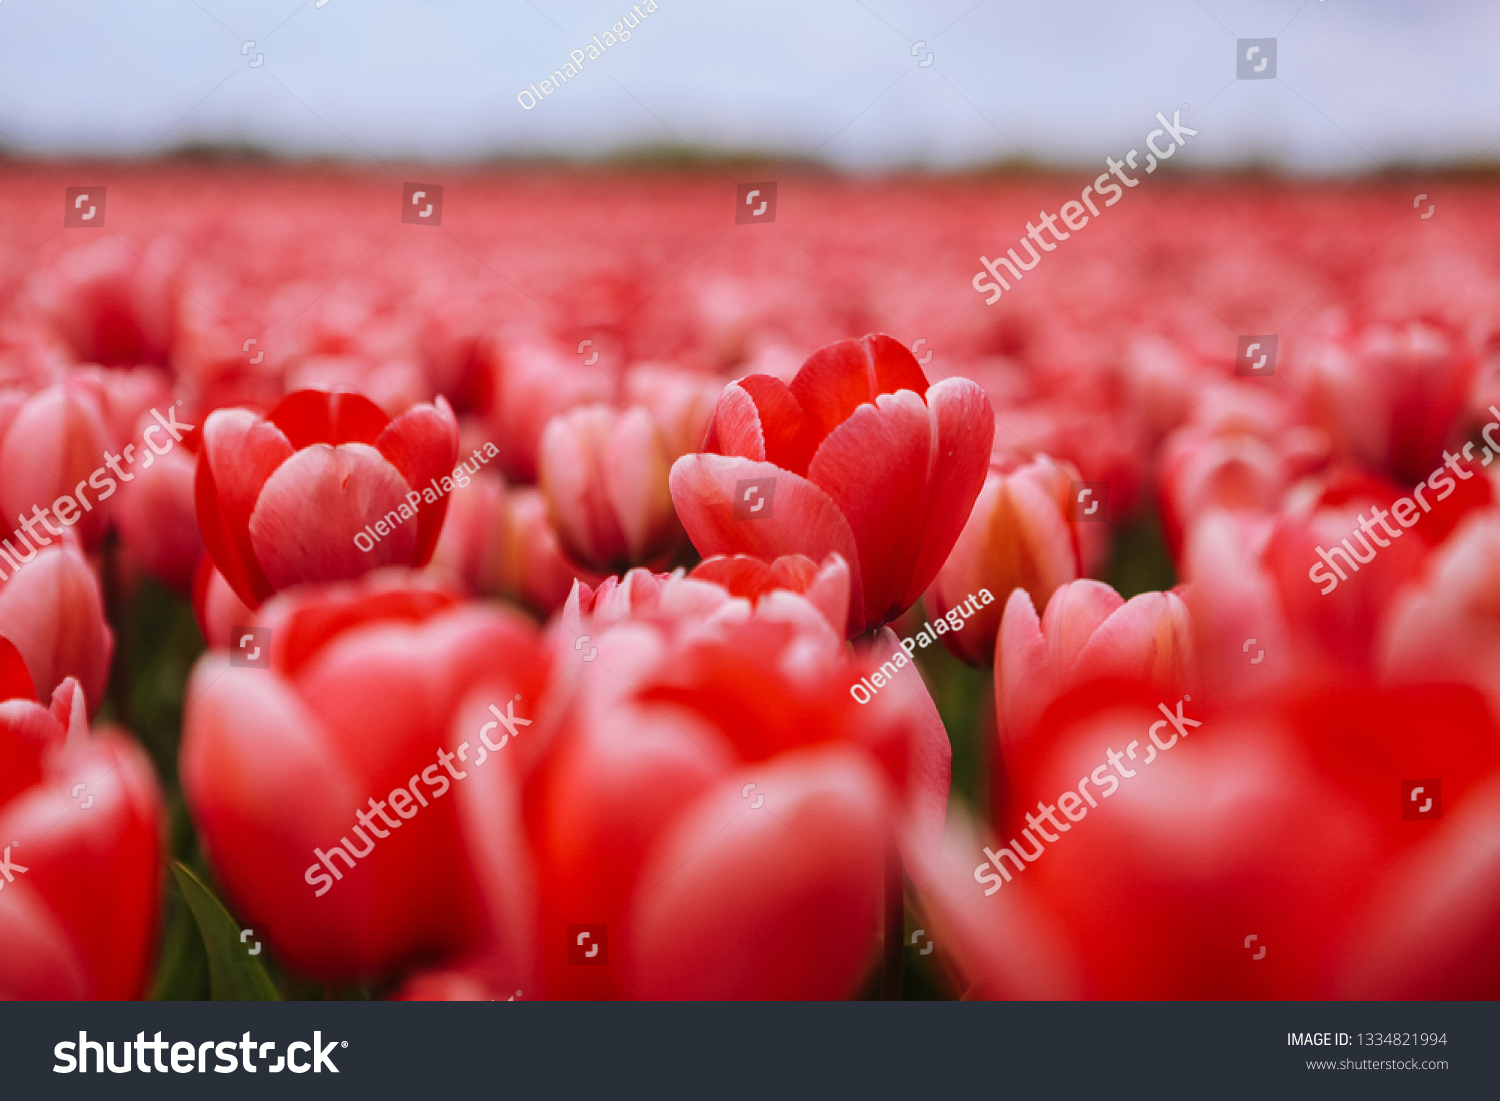 Fantastic flower field with pink tulips in Netherlands spring. Netherlands landscape with flower tulip field in Holland. Colorful dutch tulips flowering in fields and garden on spring Holland.  #1334821994